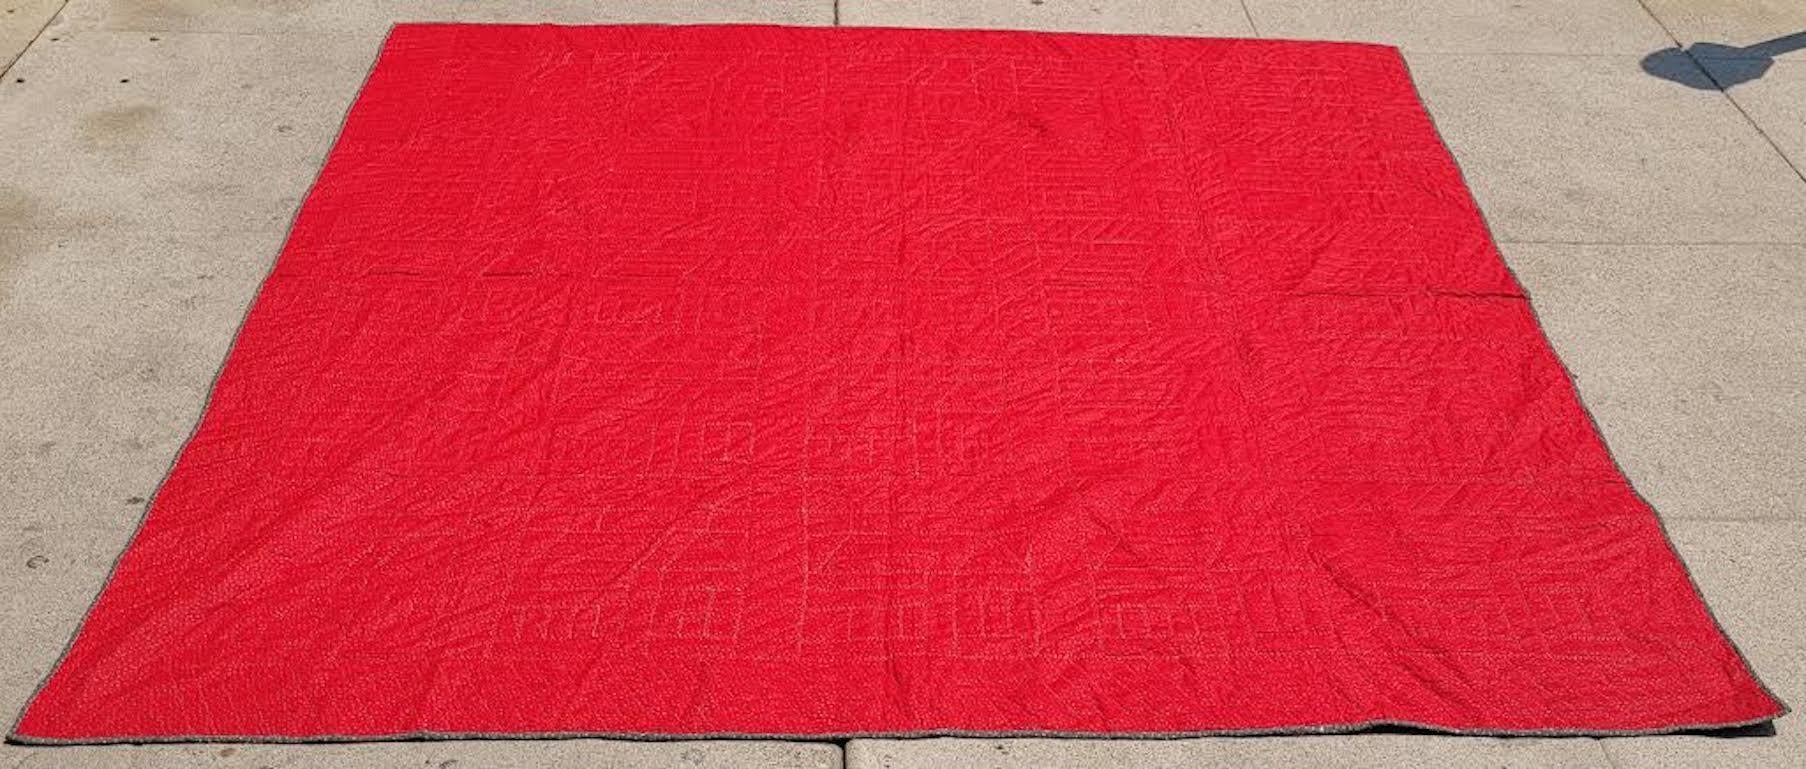 Hand-Crafted 19th C Berks County Pennsylvania School House Quilt For Sale